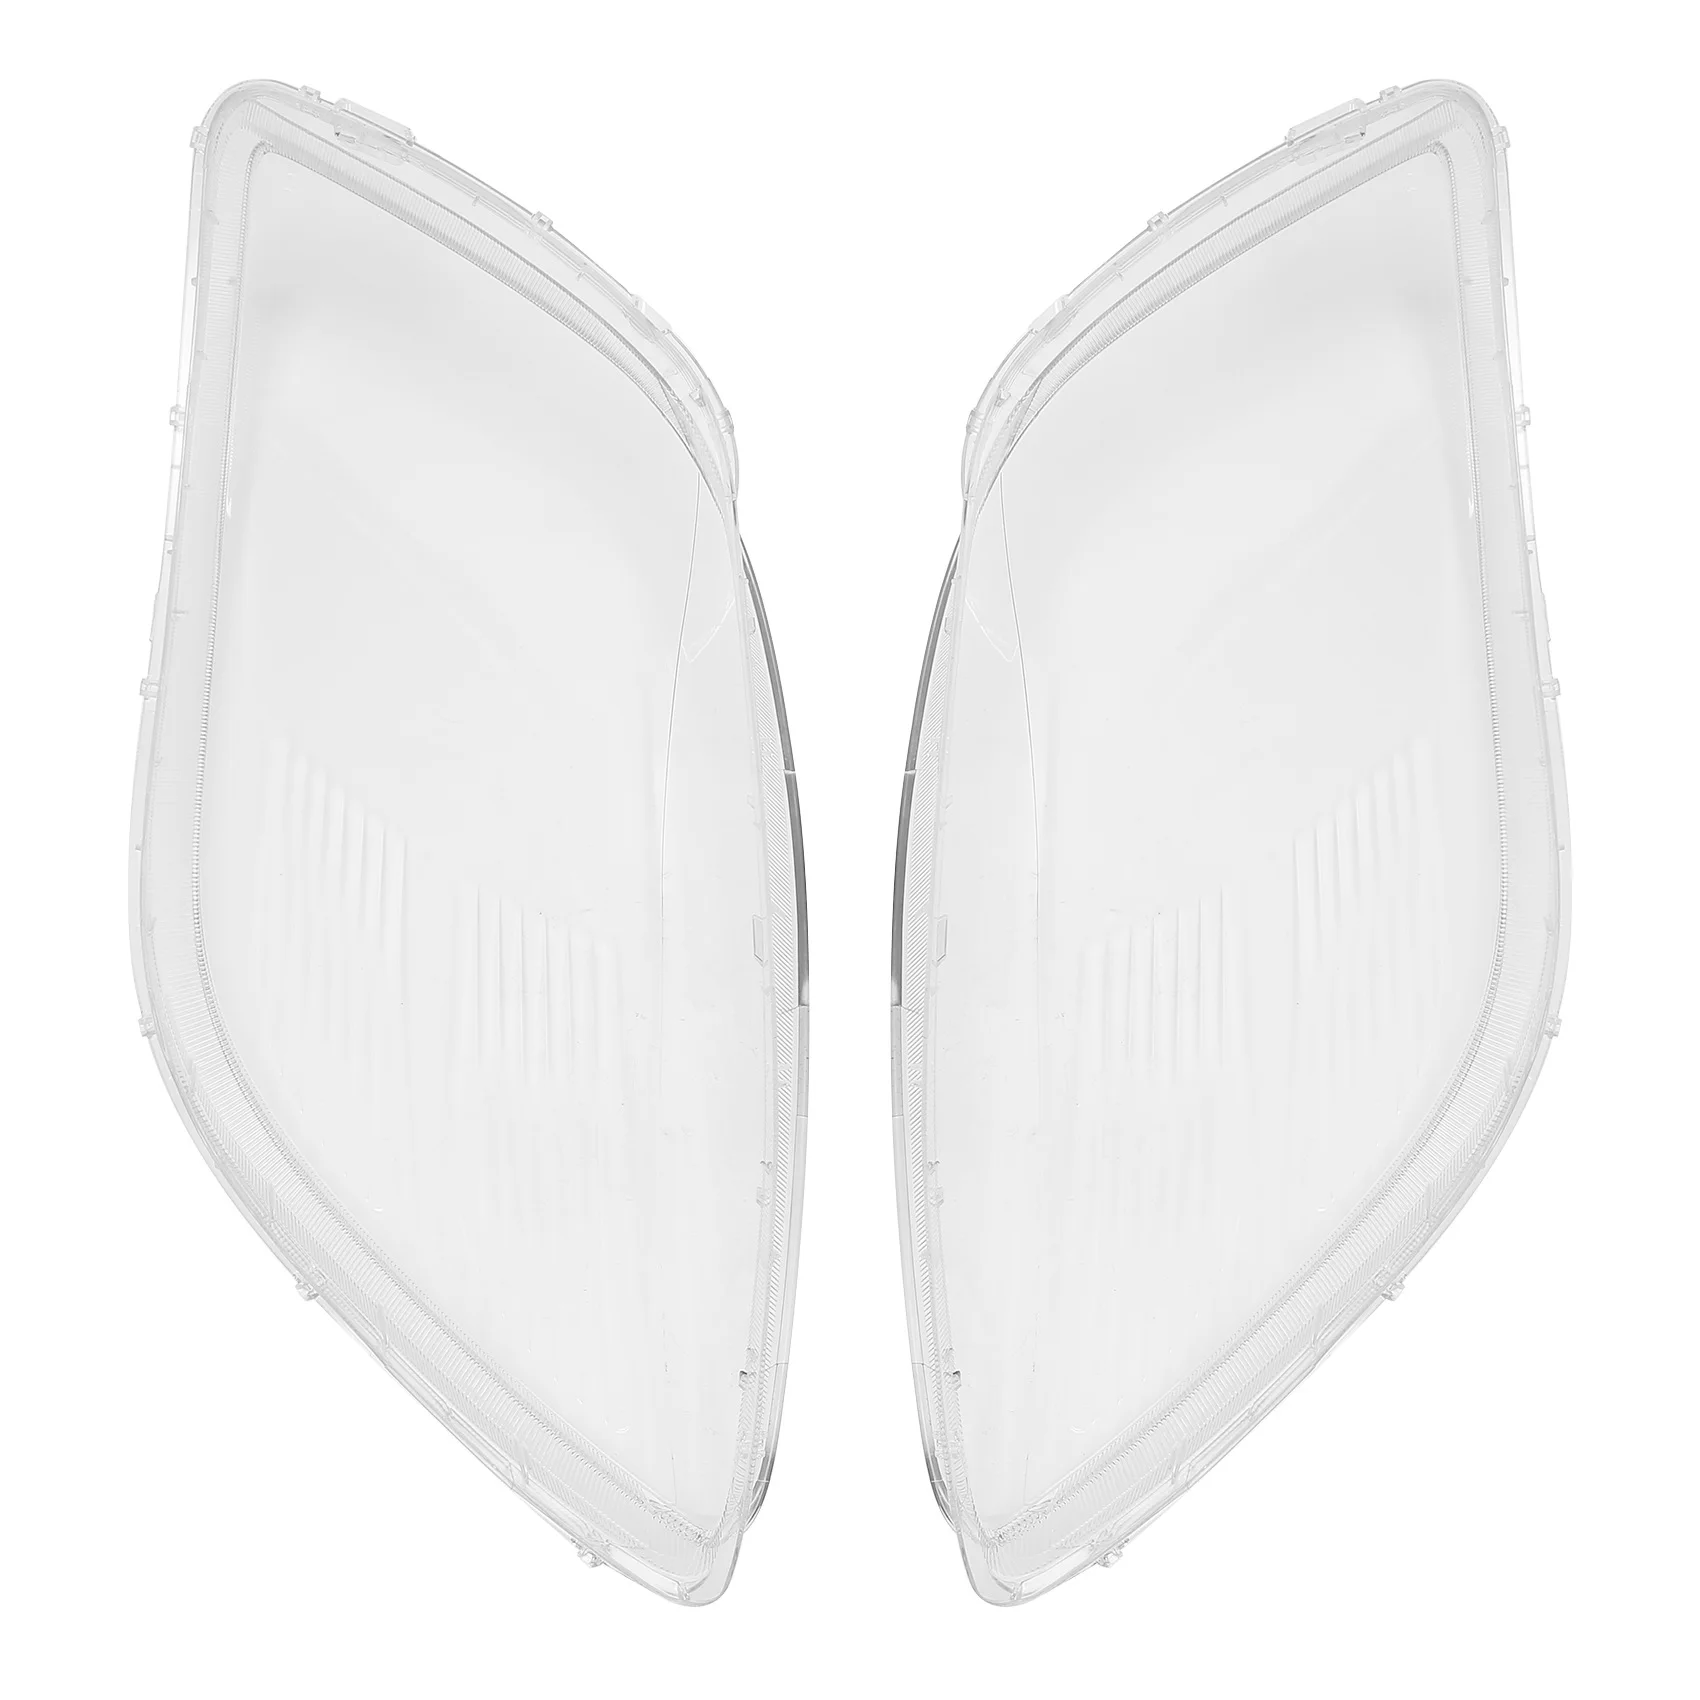 

2Pcs Car Left and Right Side Headlight Clear Lens Lamp Shade Shell Cover for Toyota Yaris 2008 2009 2010